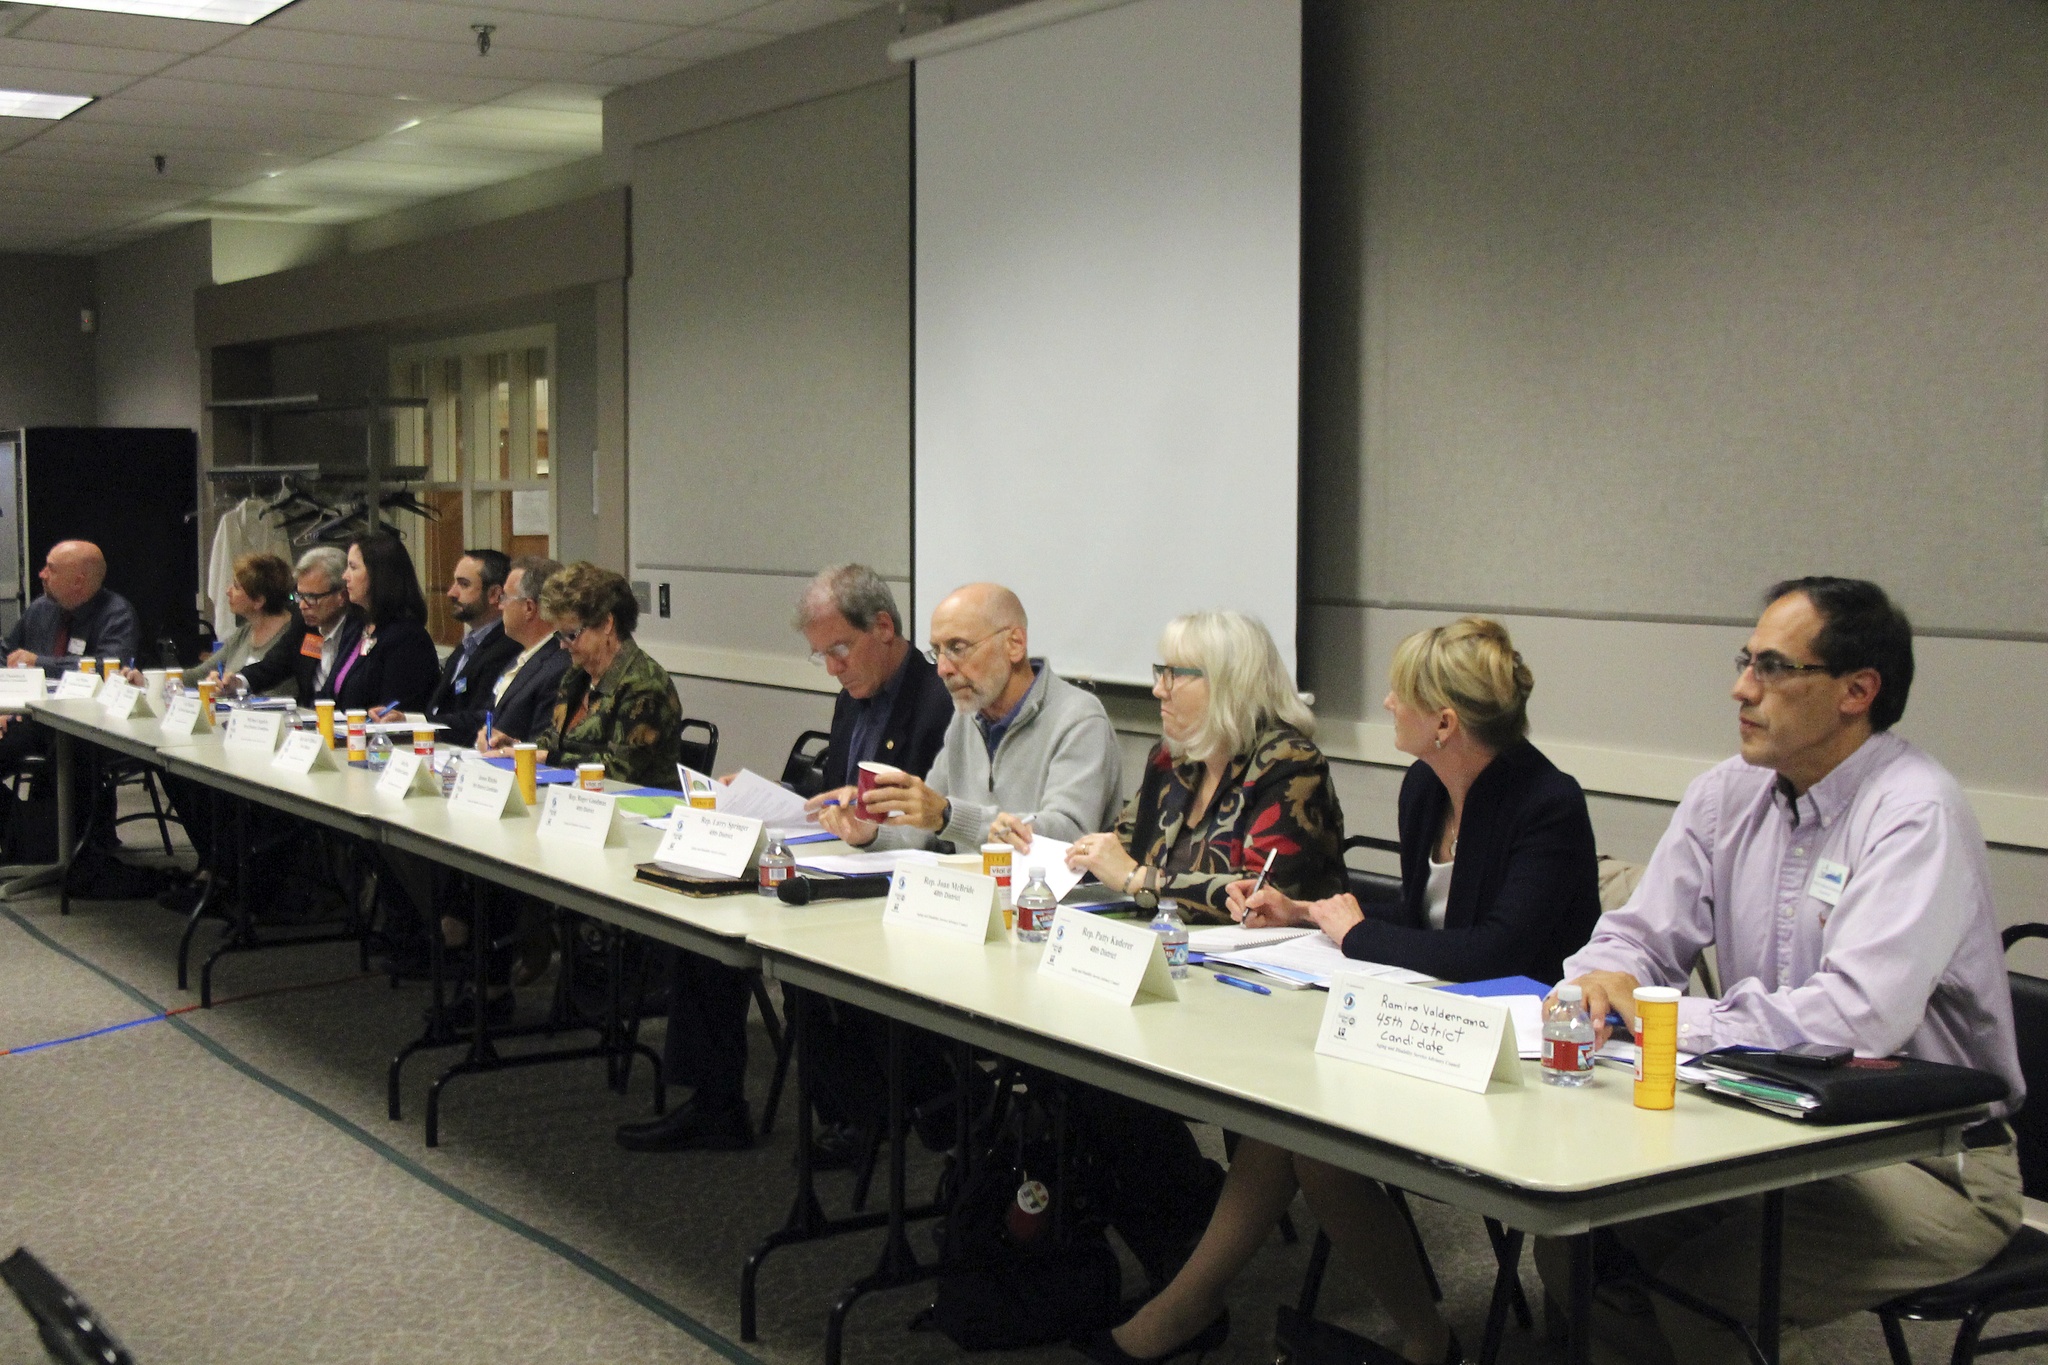 State candidates tackle aging issues during forum